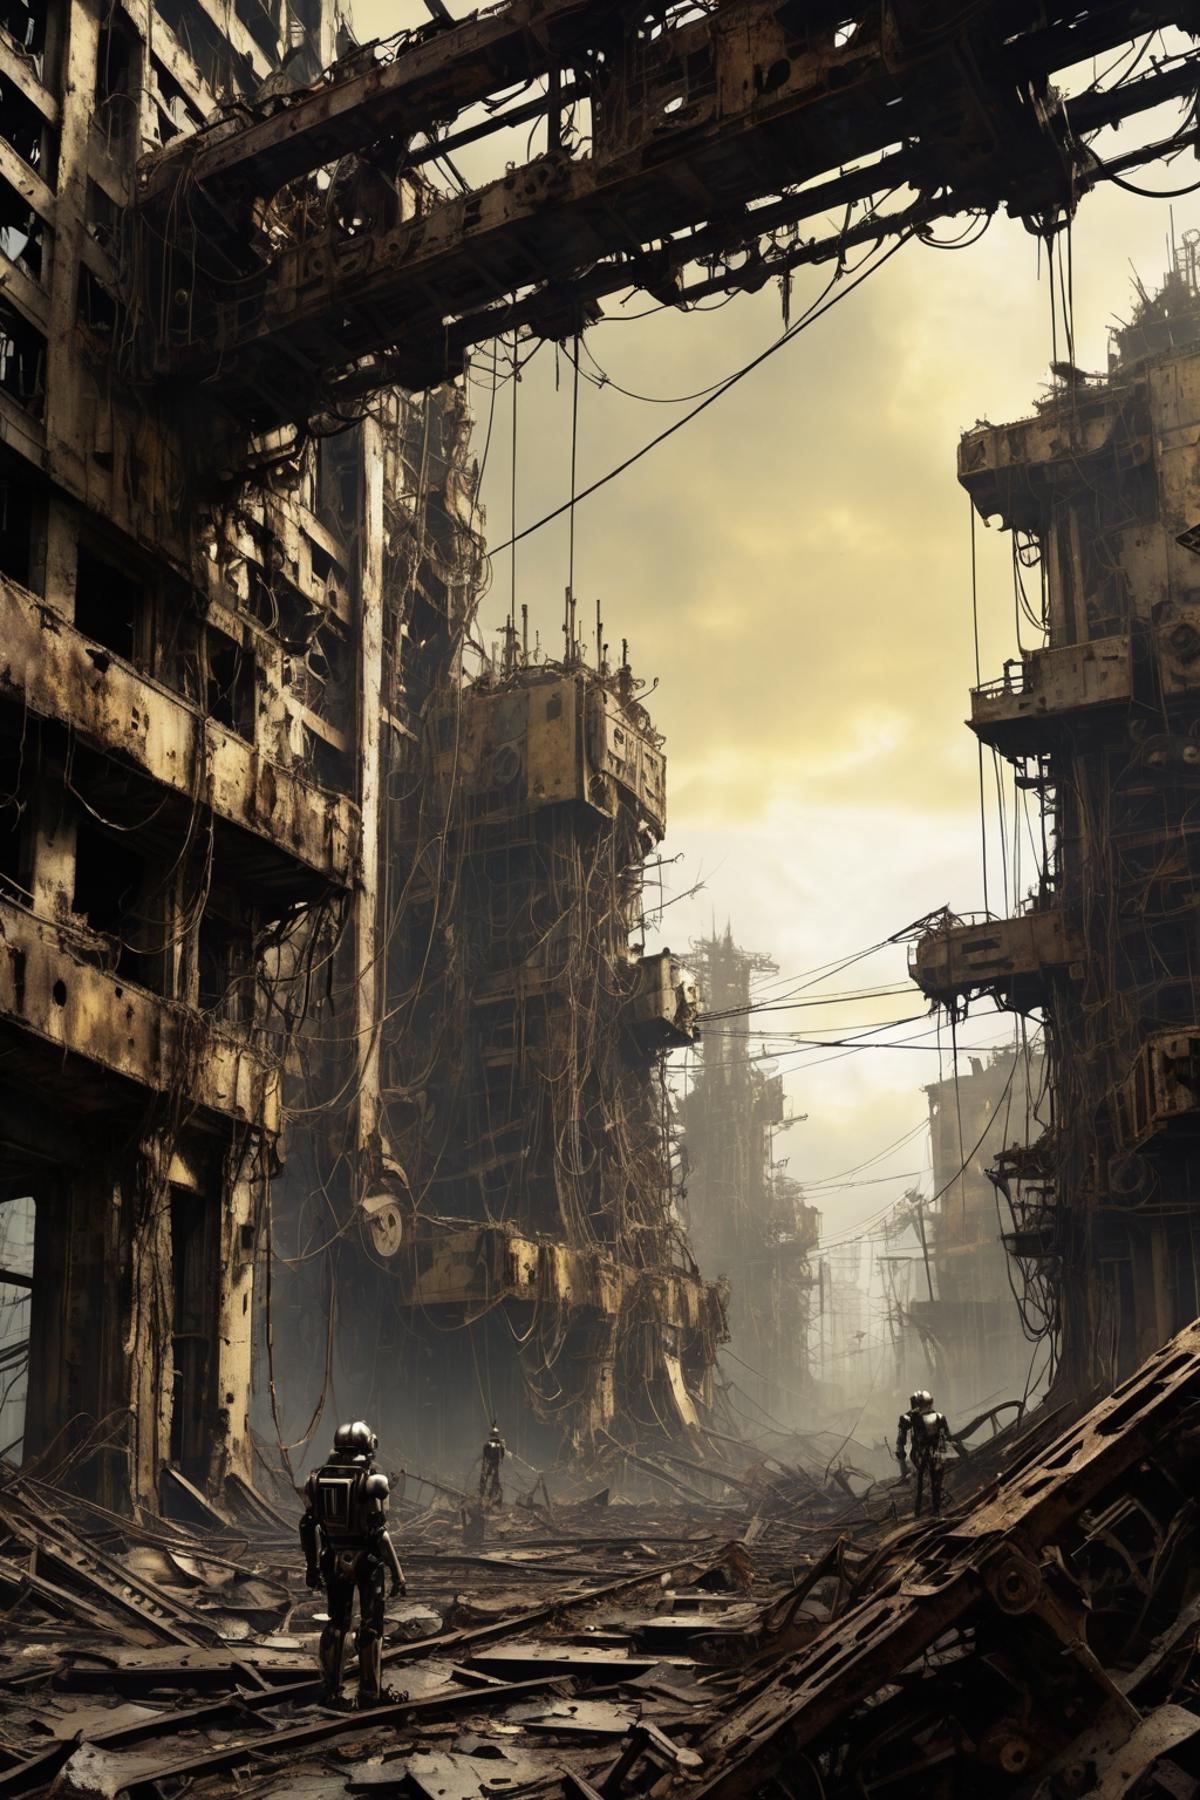 An artistic image of a destroyed city with crumbling buildings, wires, and a grey sky.